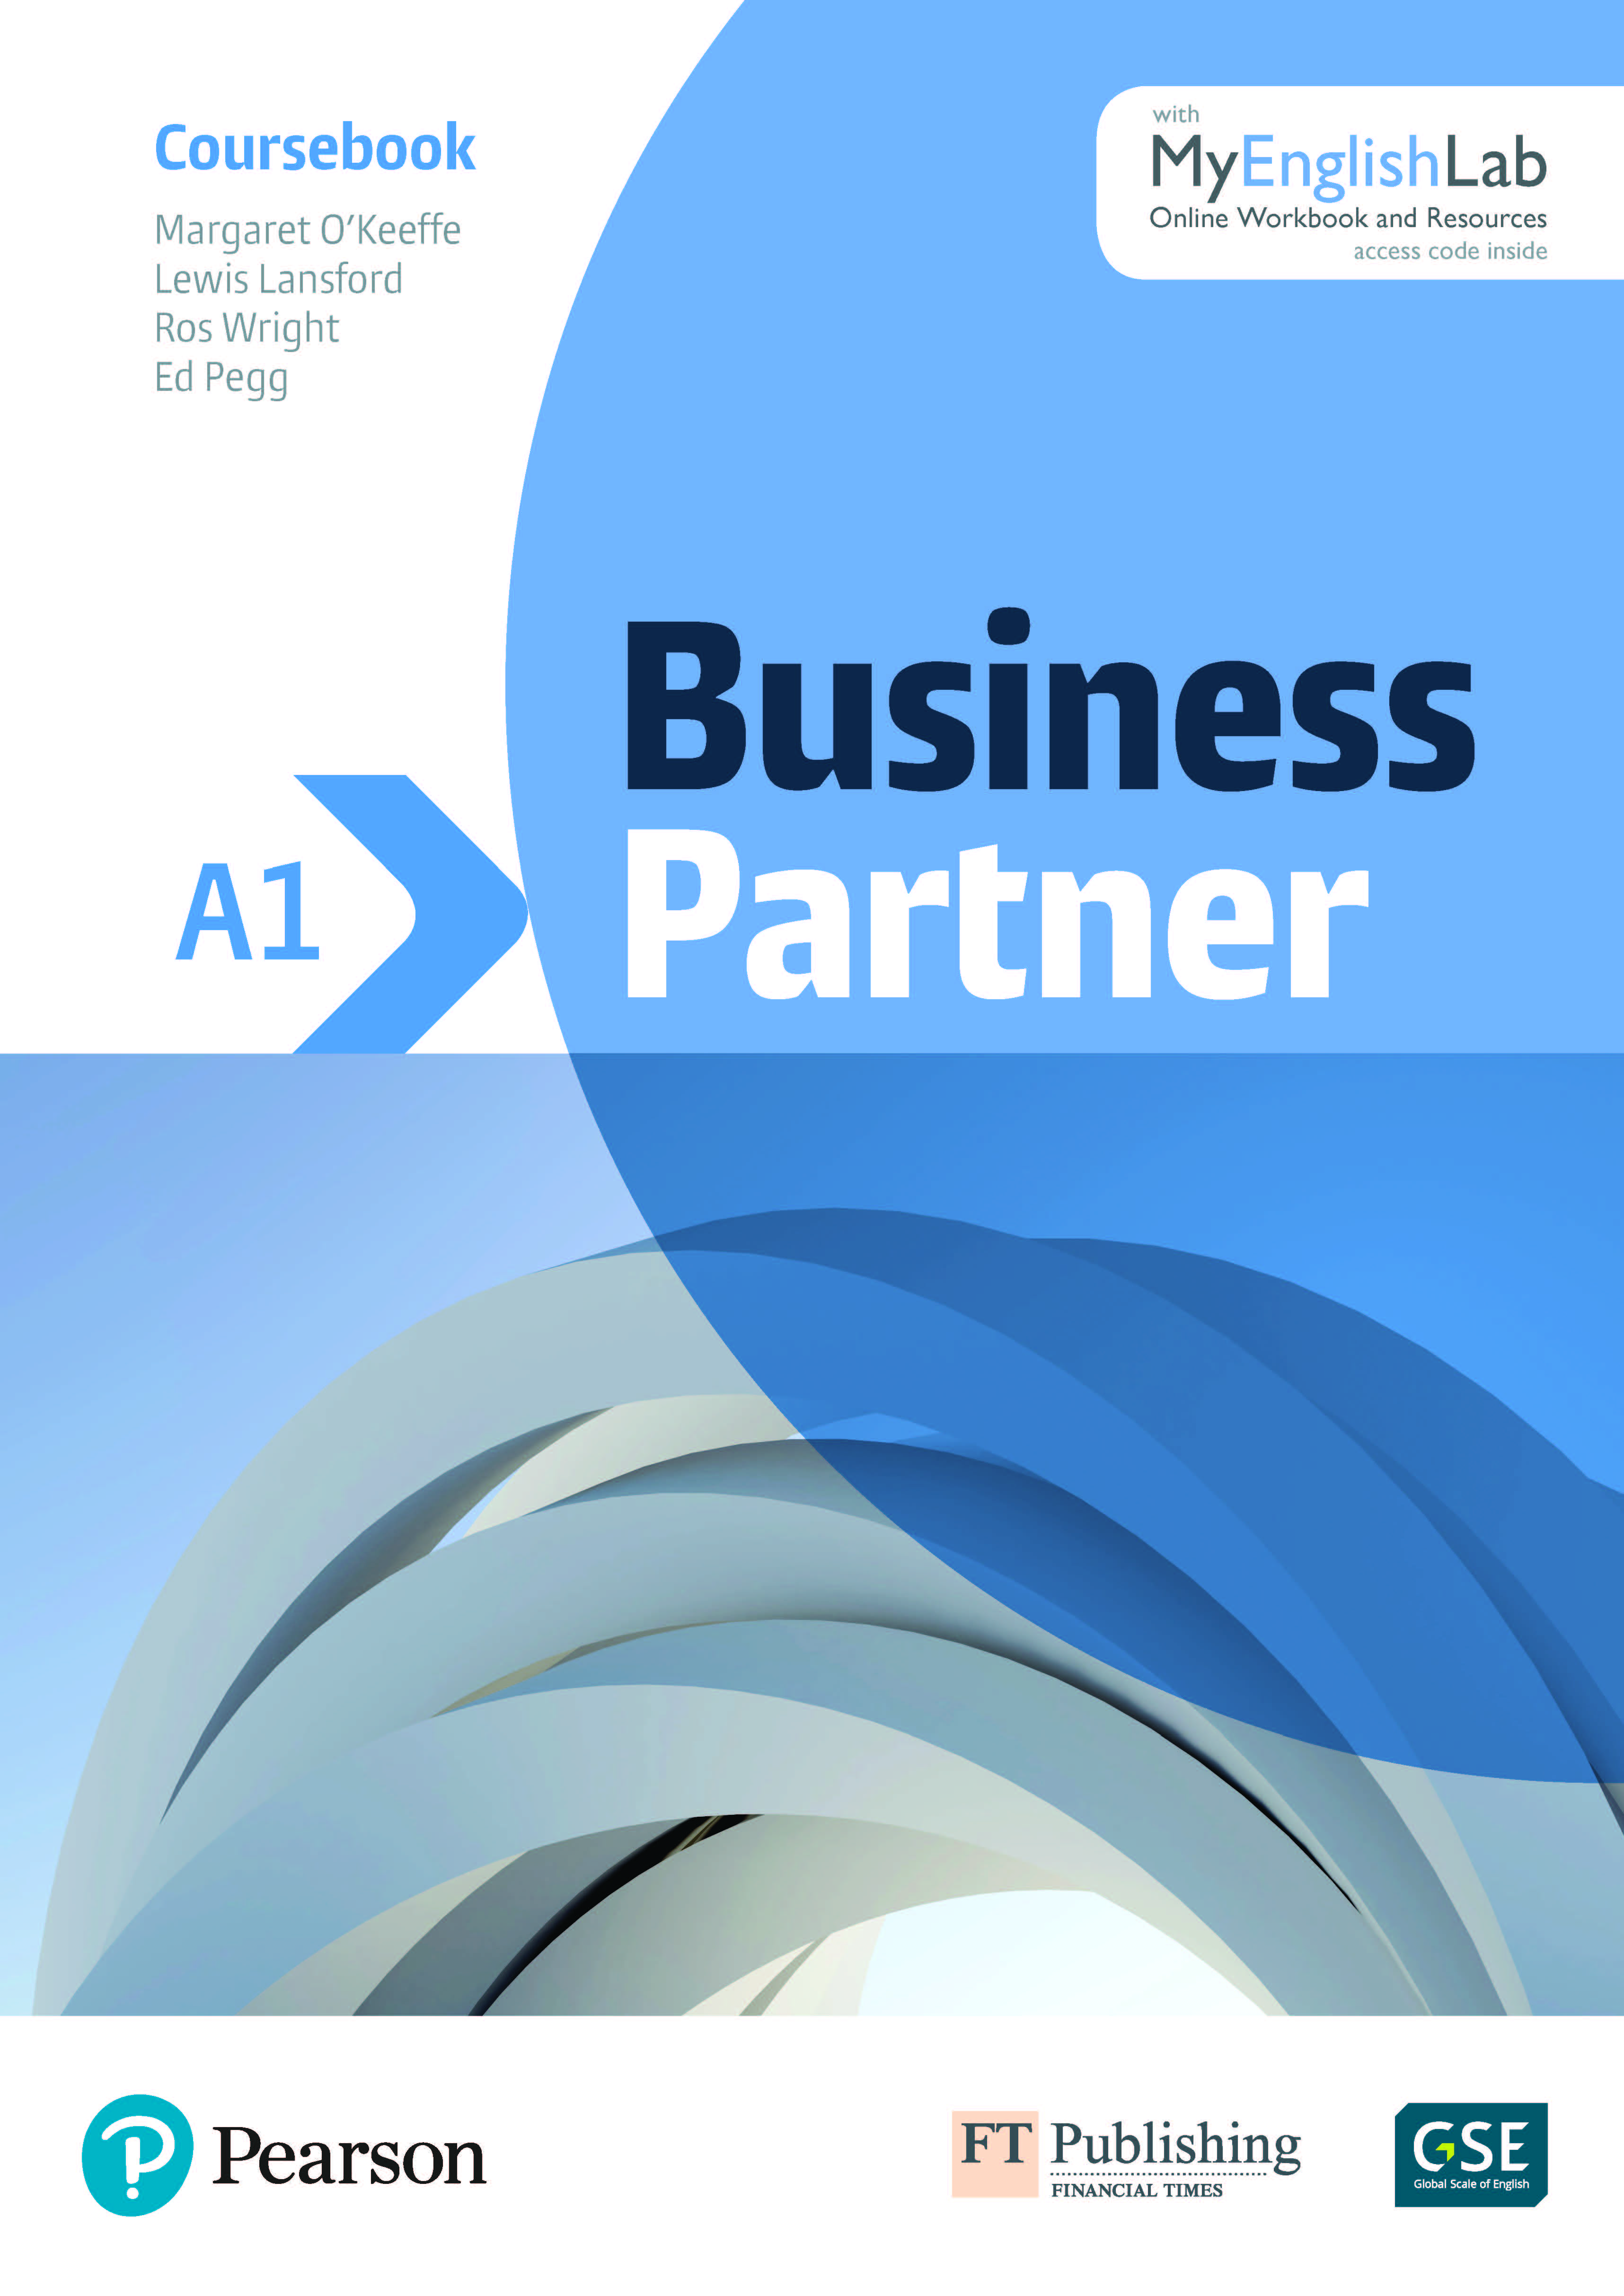 Business Partner cover image